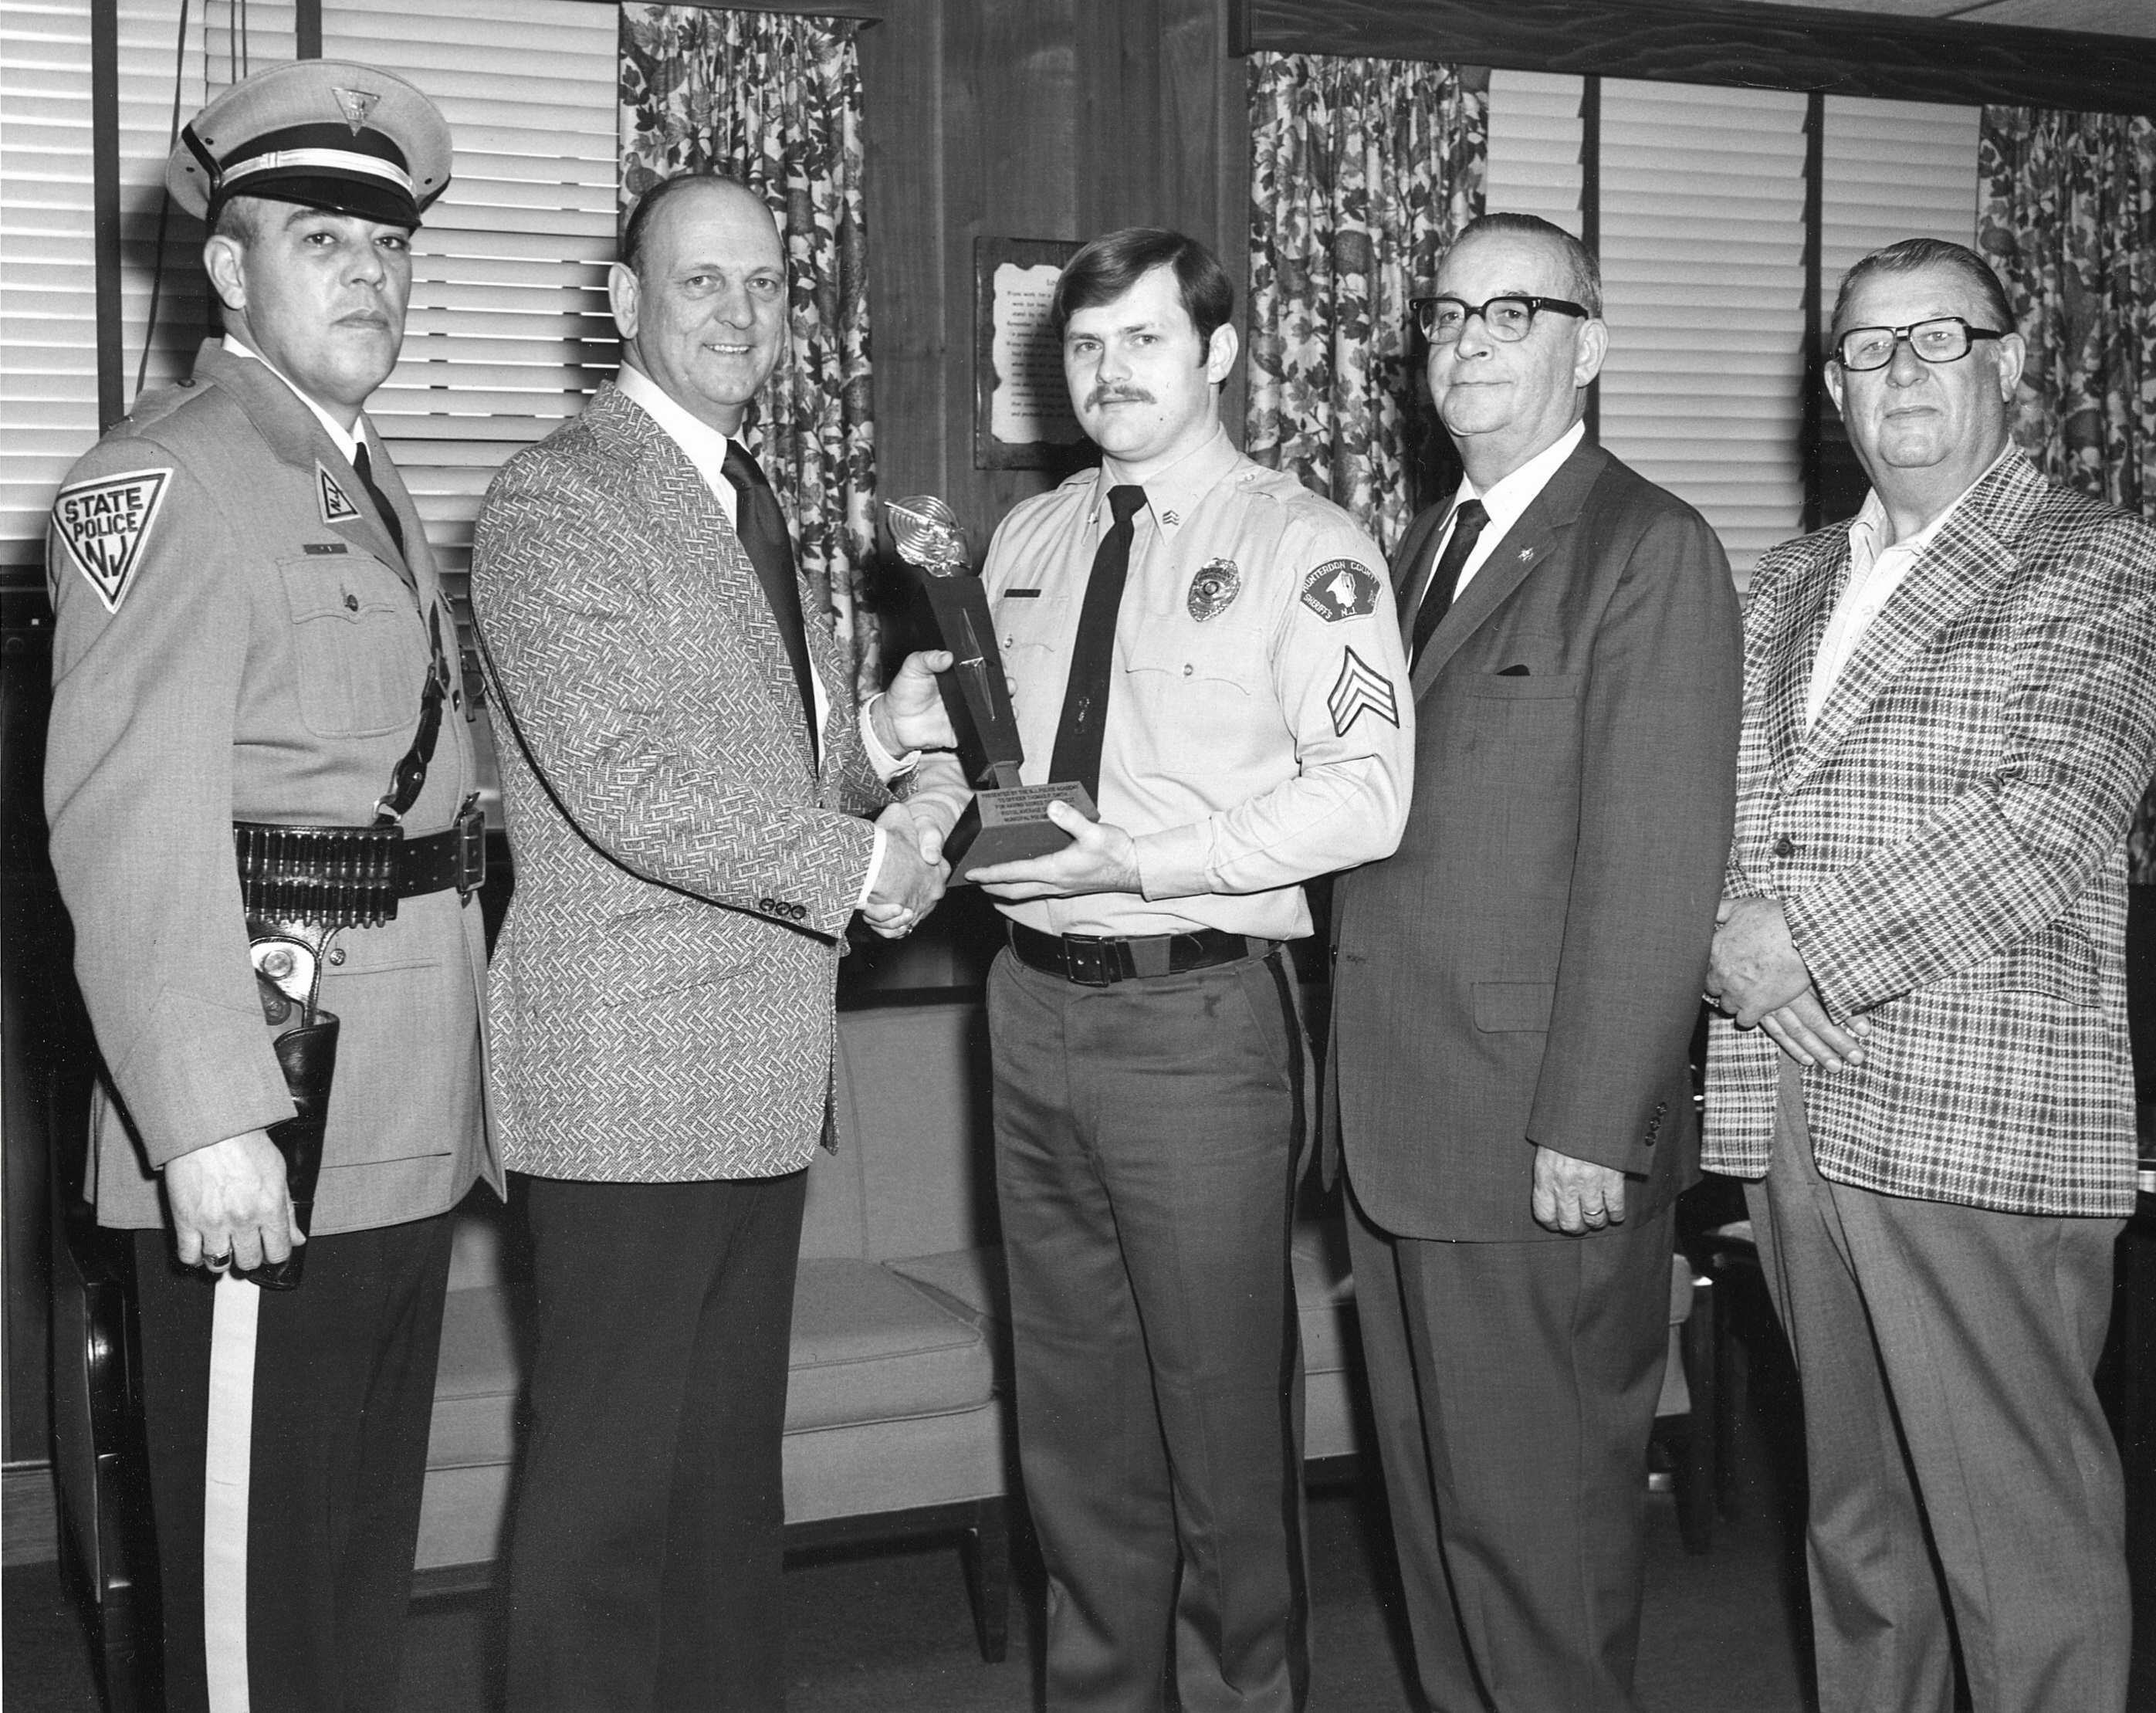 A Sergeant in the Hunterdon County Sheriff's Office receiving a pistol award from the Sea Girt Police Academy in 1975